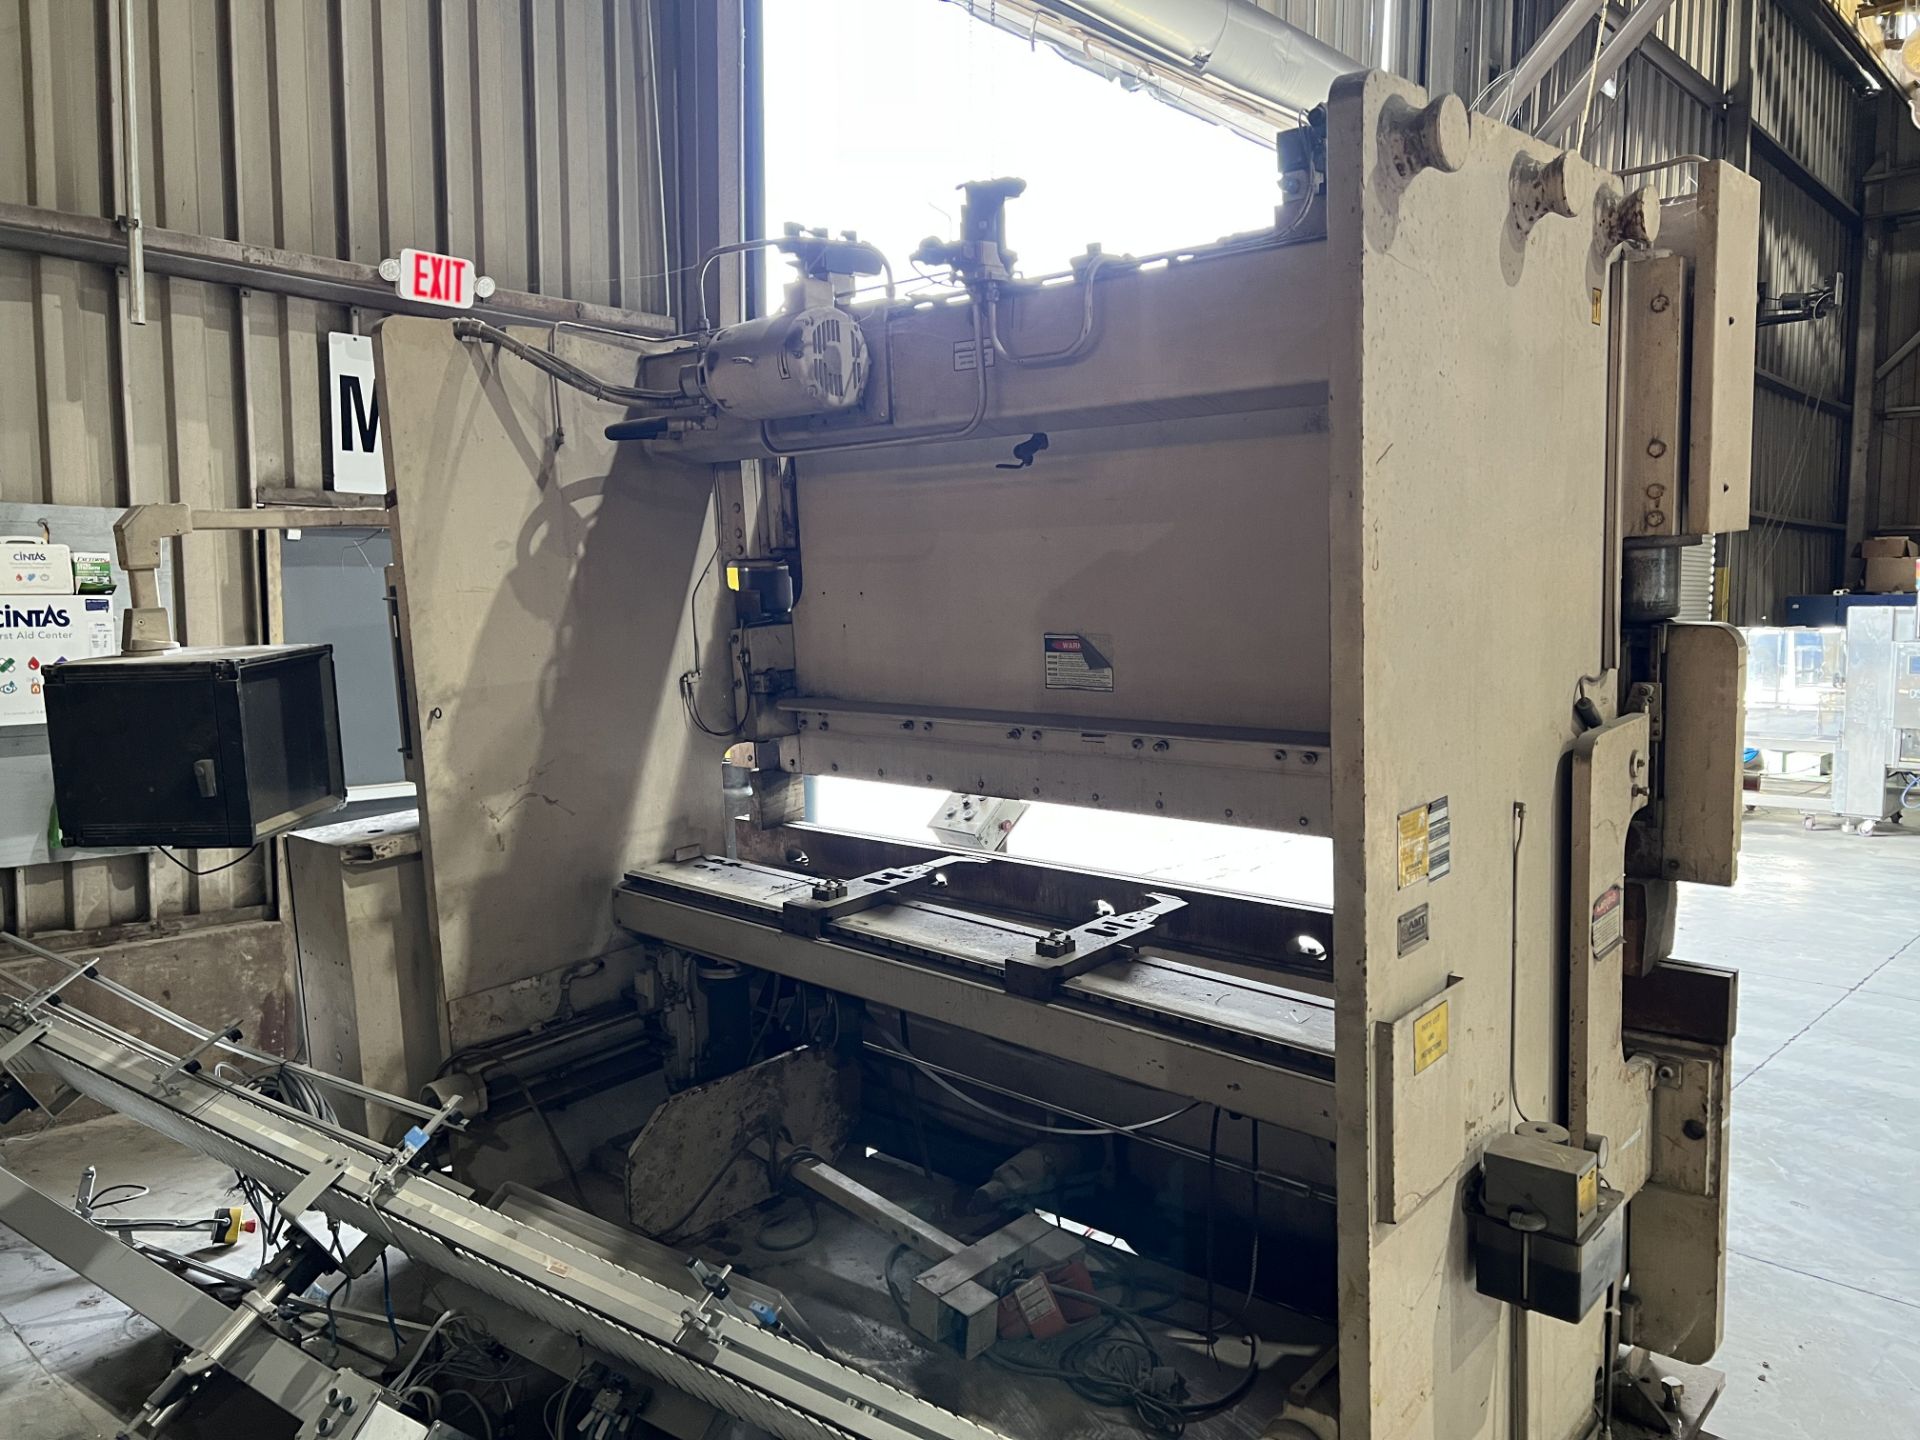 WYSONG CNC PRESS BRAKE, Model PHP100-120, Date: n/a; s/n HPB46-127-X, Approx. Capacity: 100 TON 10', - Image 25 of 25